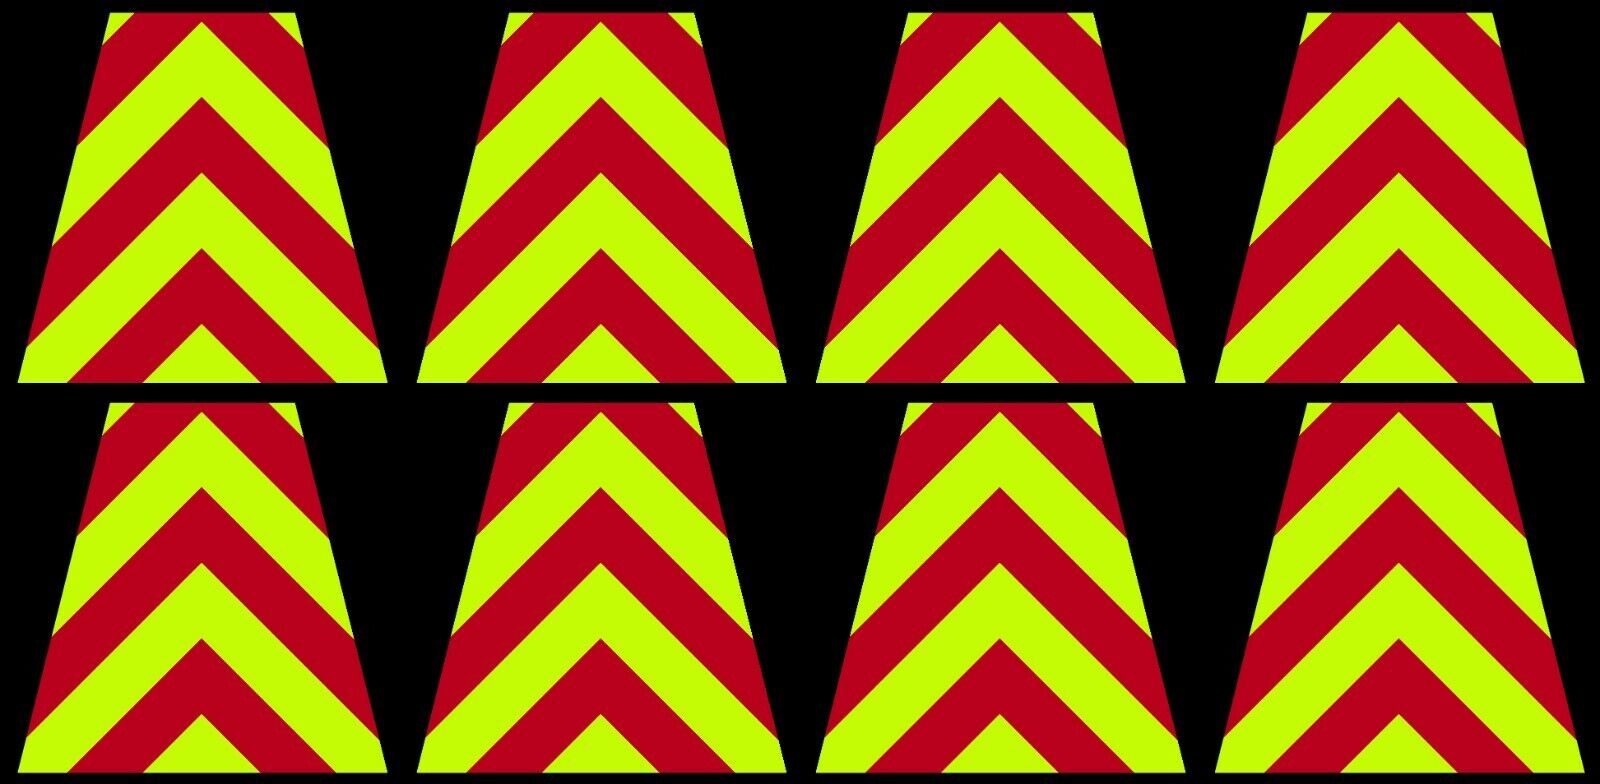 8 Reflective Fluorescent Yellow and Red Chevron Fire Helmet Tetrahedrons Tets